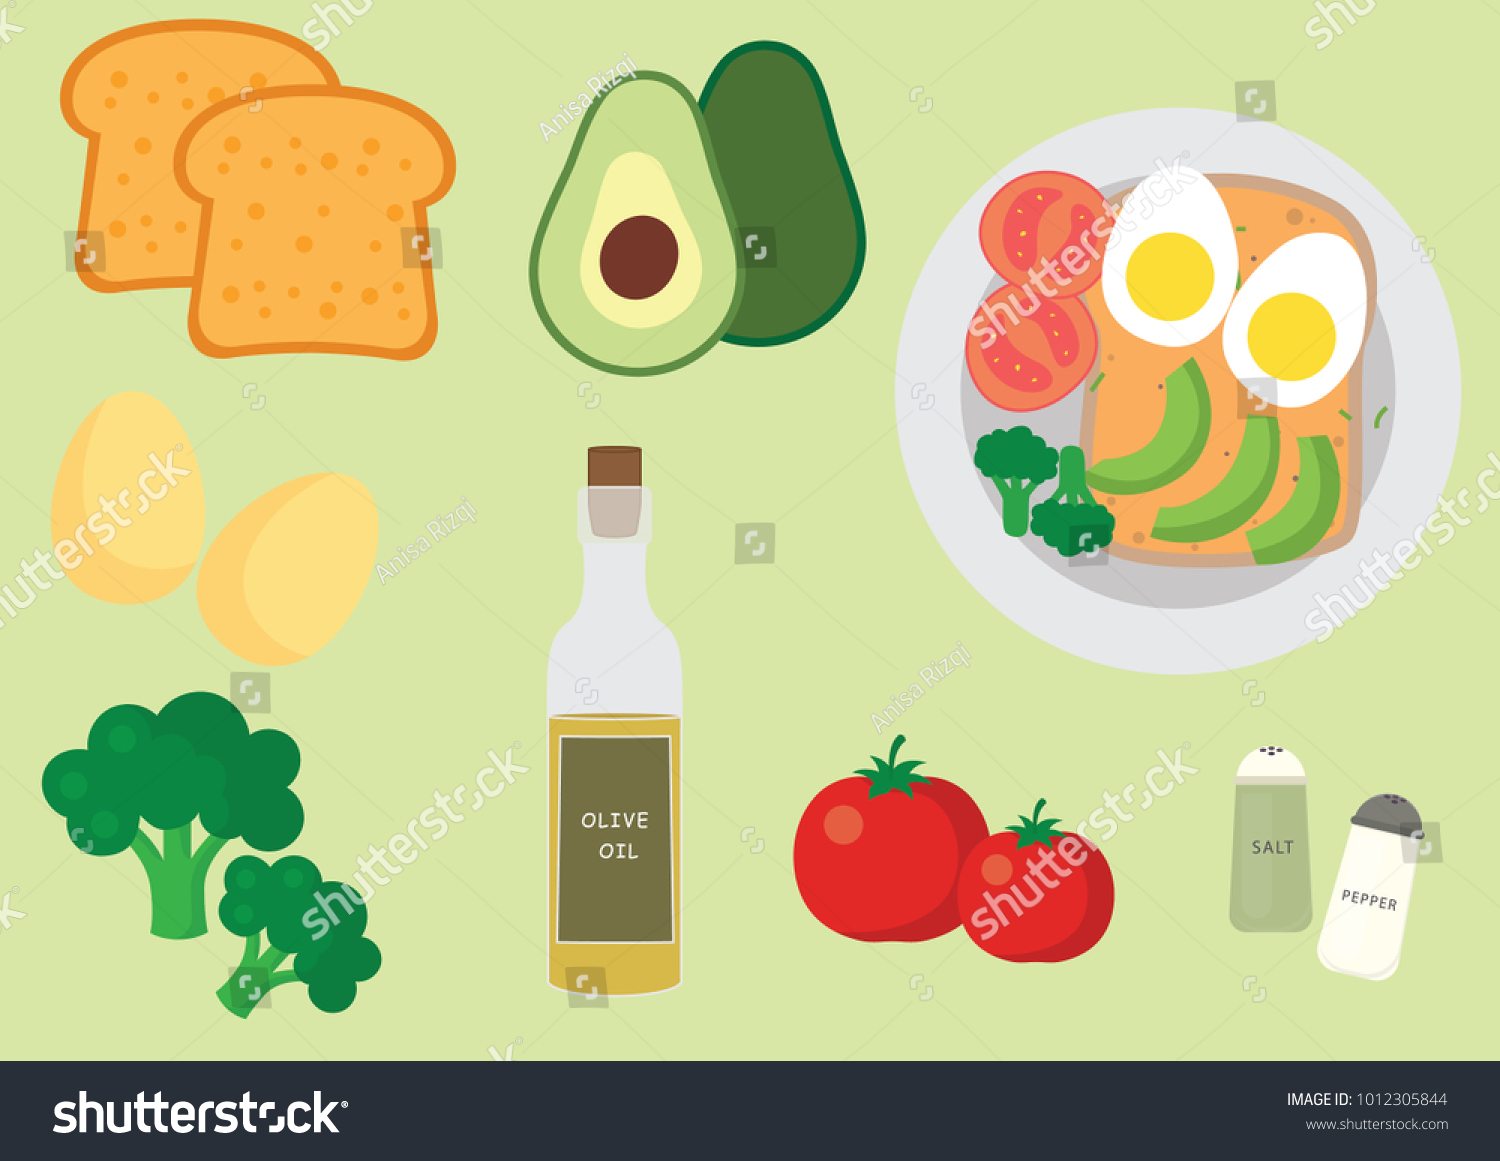 SVG of Avocado Toast with Poached Egg Recipe Vector svg